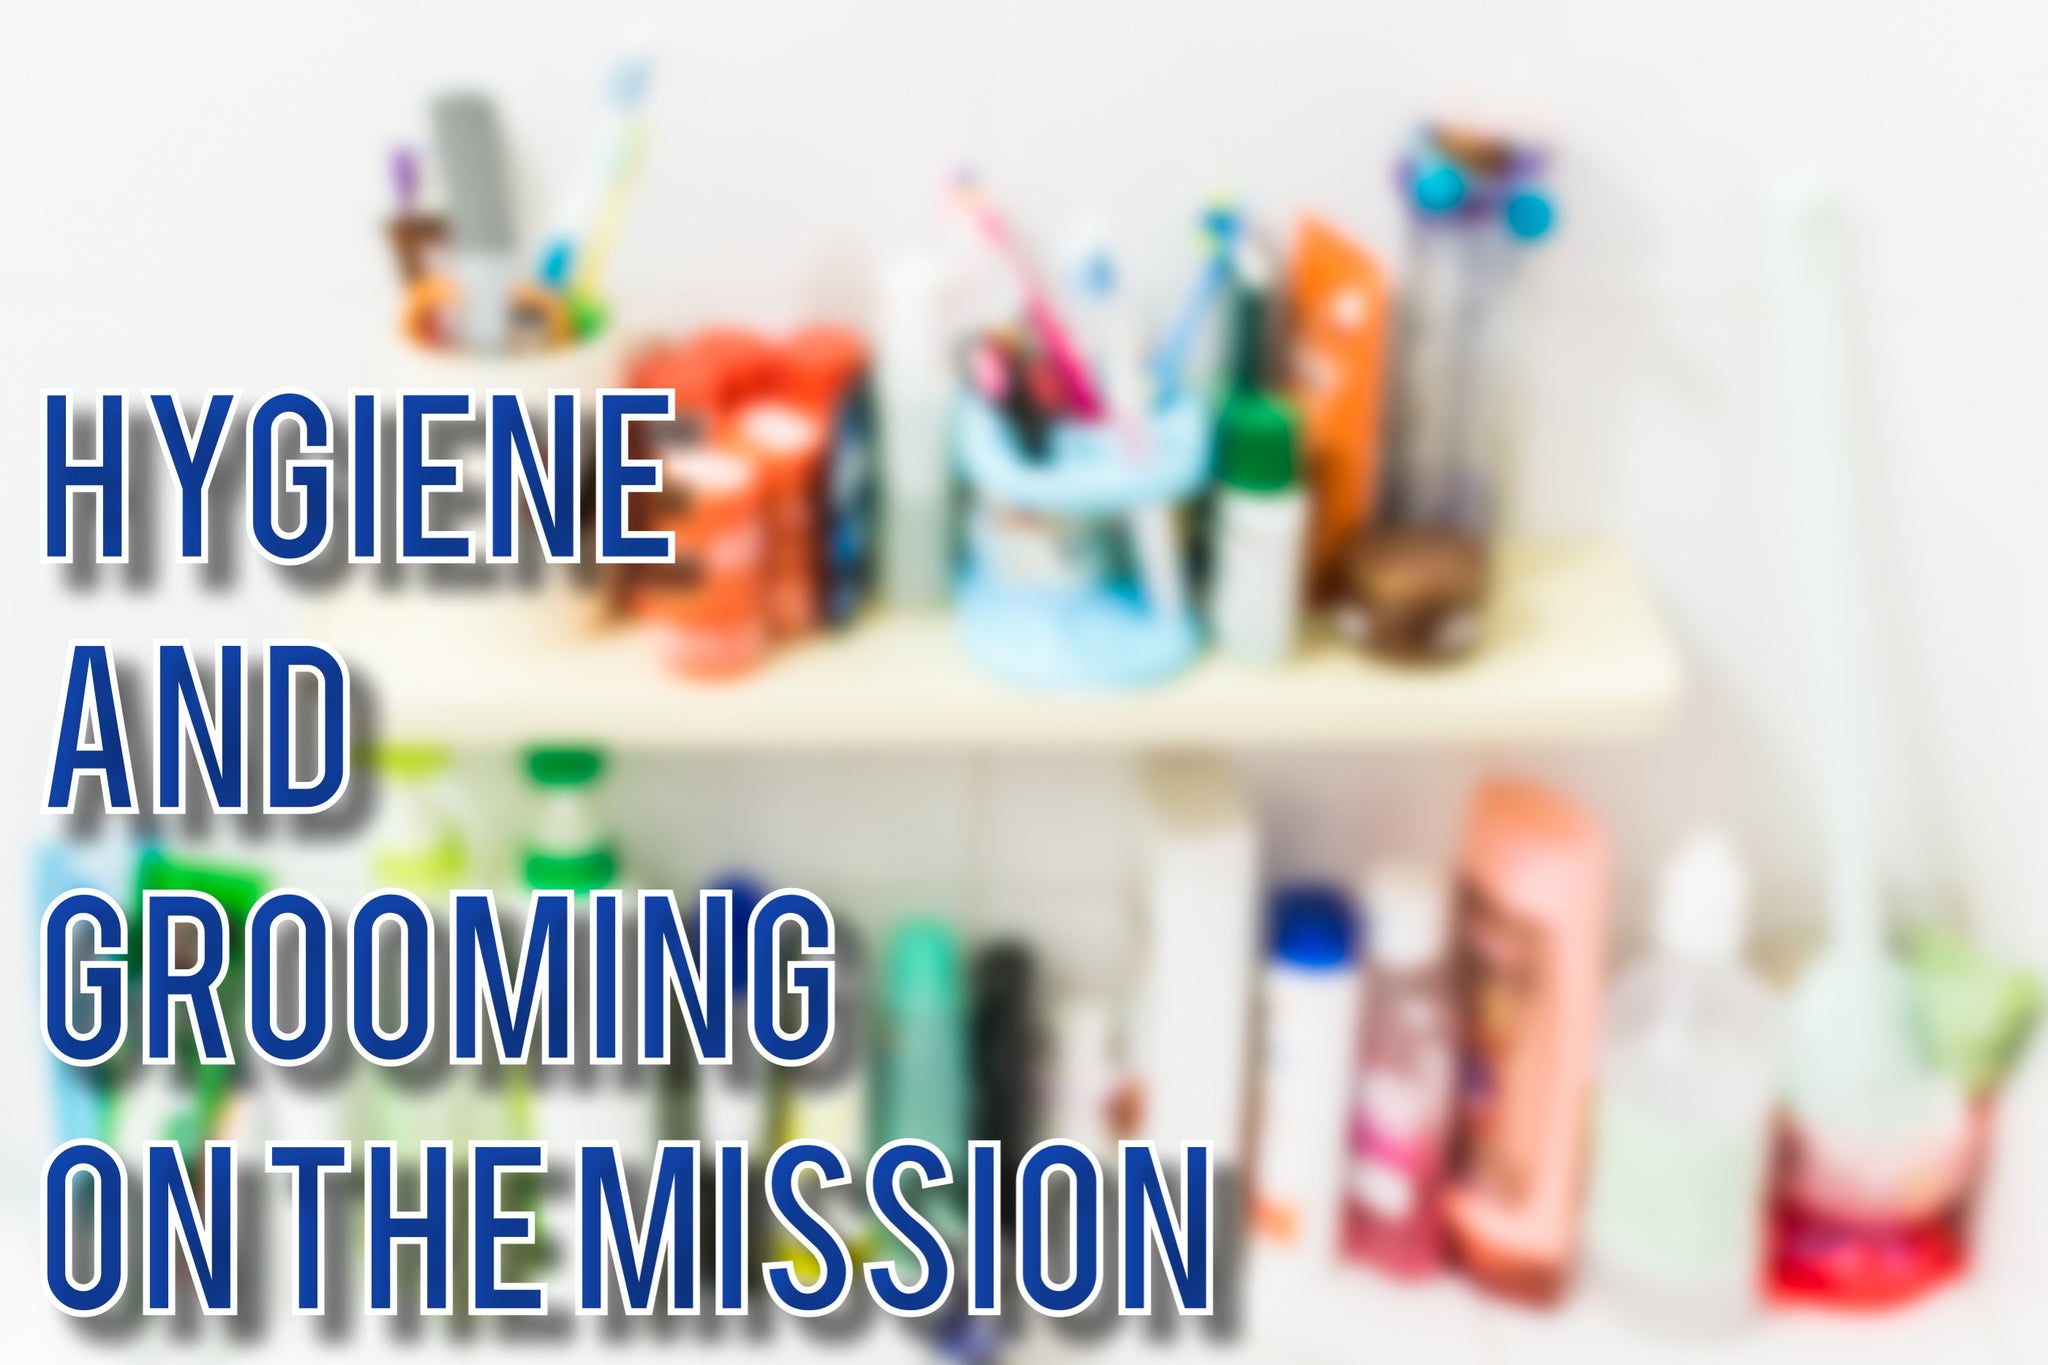 Hygiene and Grooming on the Mission